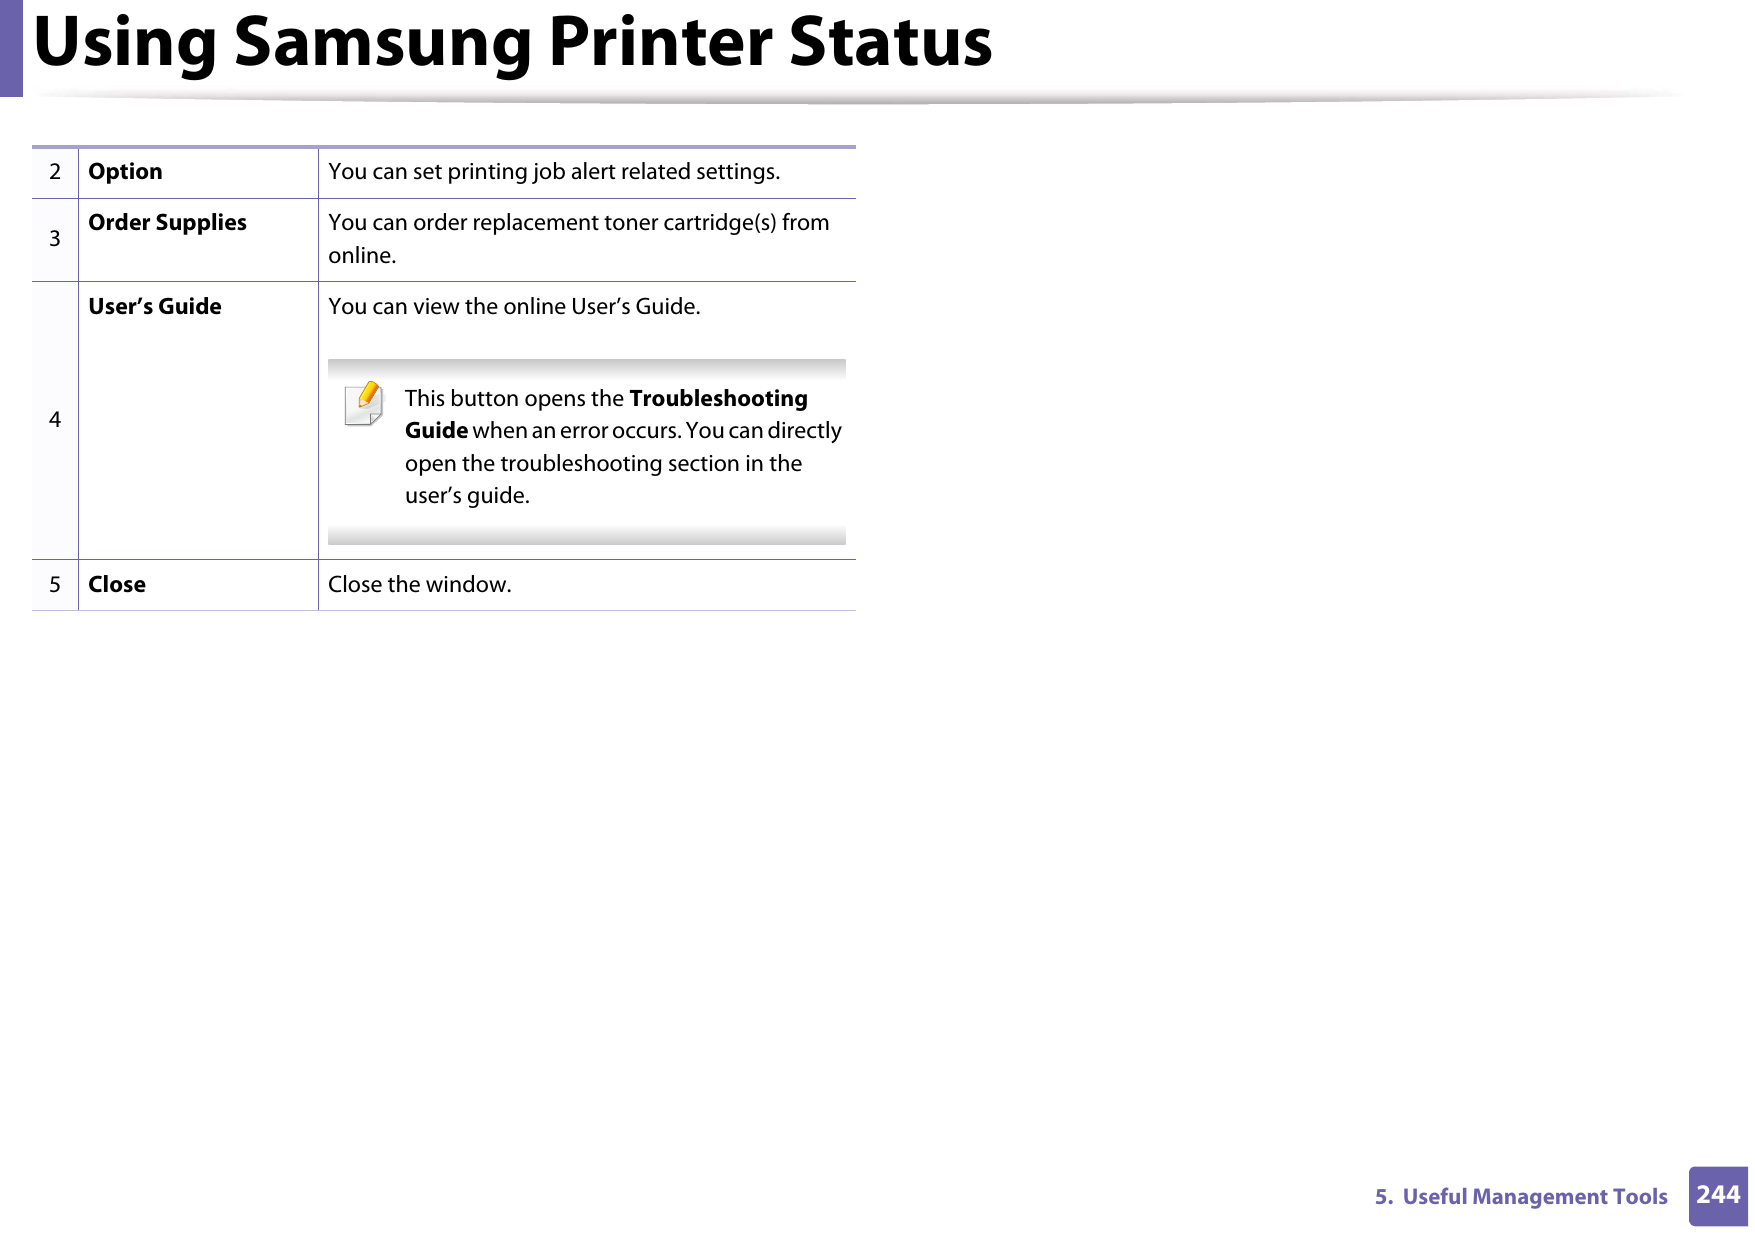 Using Samsung Printer Status2445.  Useful Management Tools2Option You can set printing job alert related settings. 3Order Supplies You can order replacement toner cartridge(s) from online.4User’s Guide You can view the online User’s Guide. This button opens the Troubleshooting Guide when an error occurs. You can directly open the troubleshooting section in the user’s guide.  5Close Close the window.